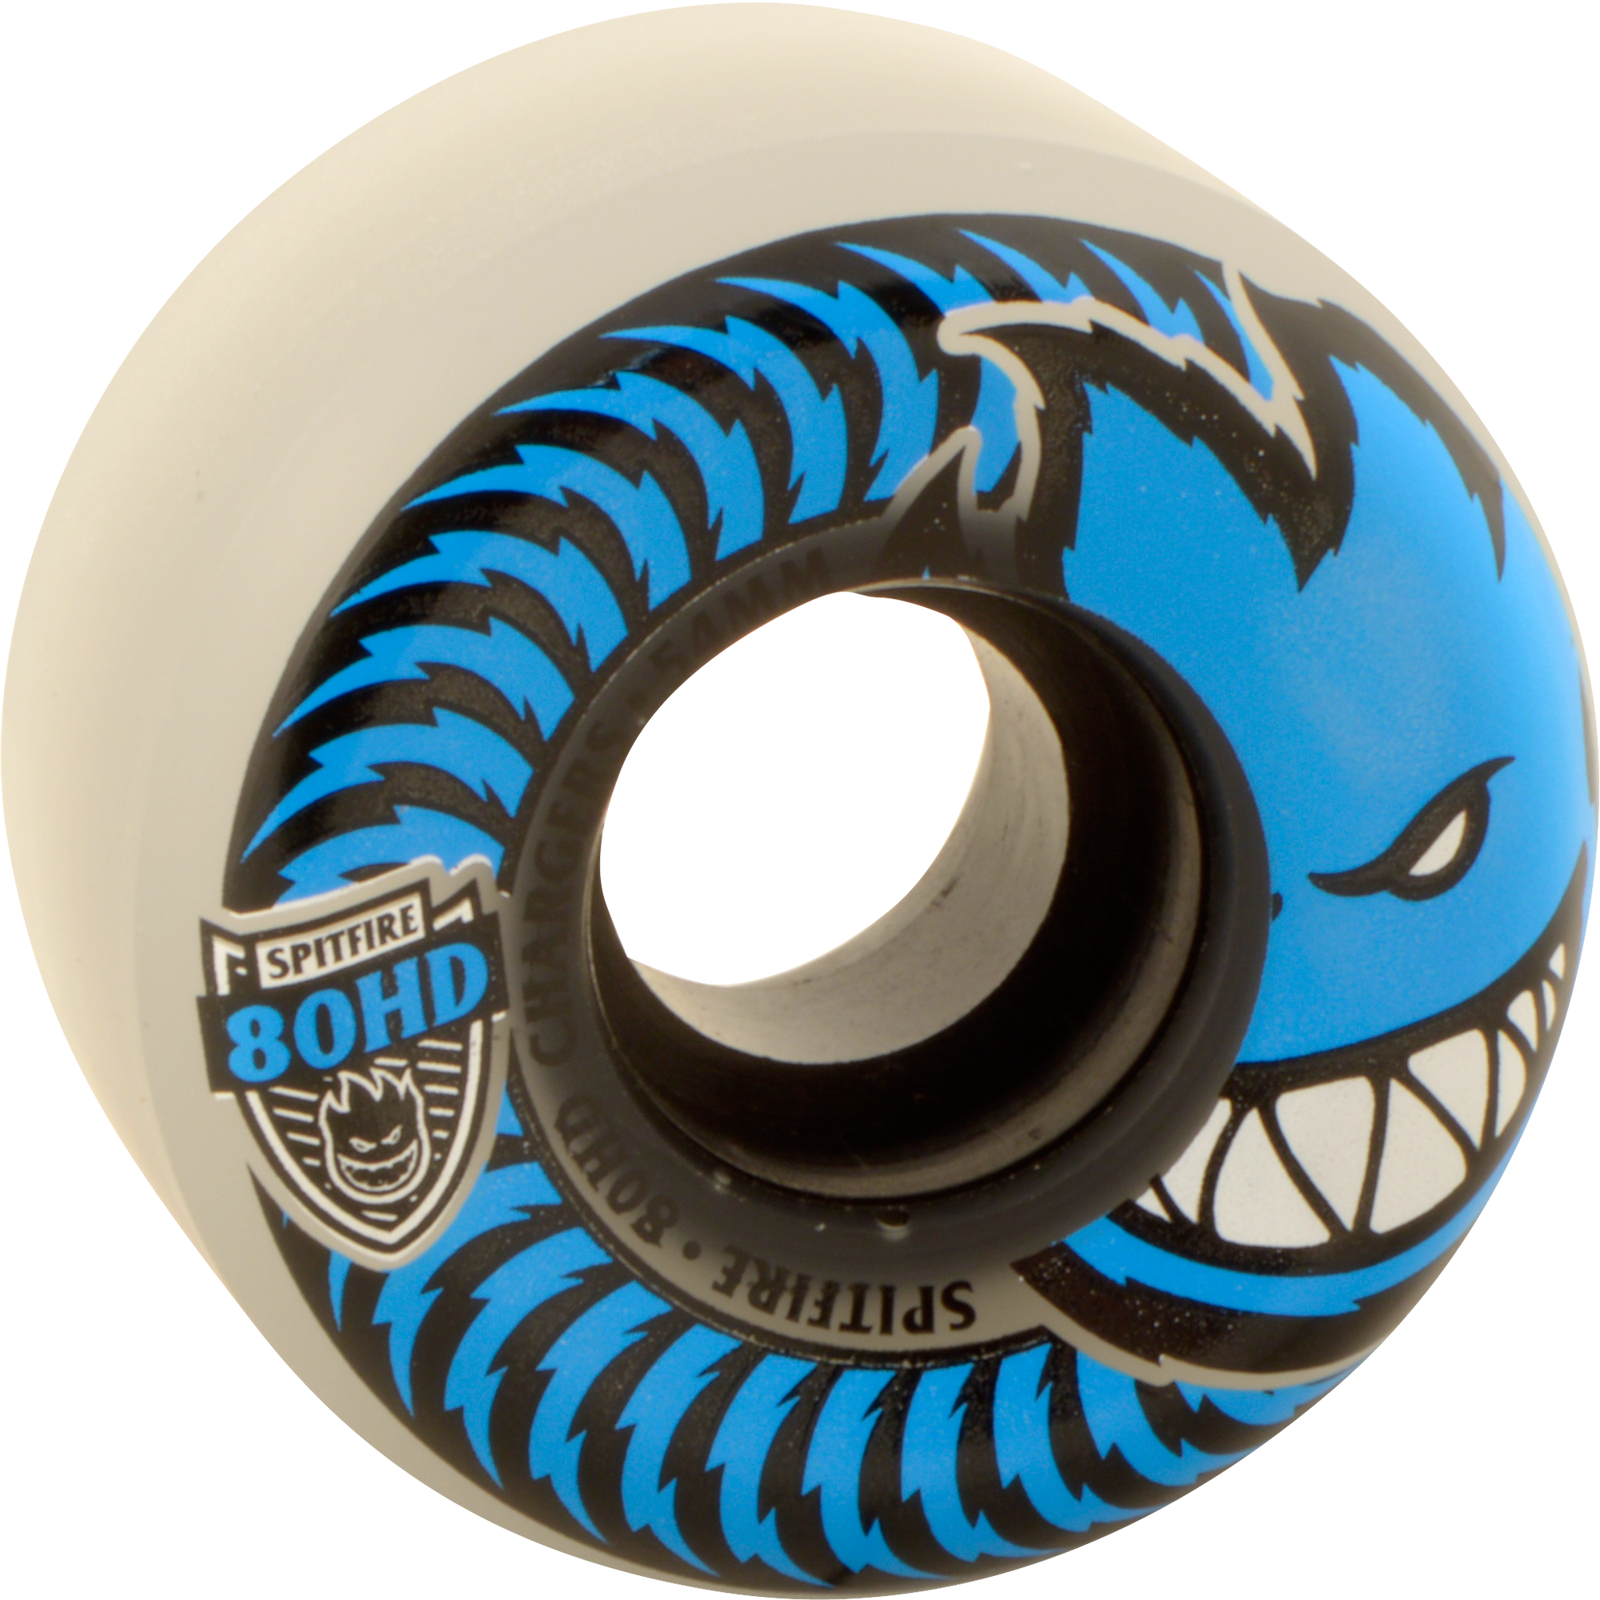 SPITFIRE // 80HD CHARGER CONICAL FULL 54mm CLEAR/BLUE